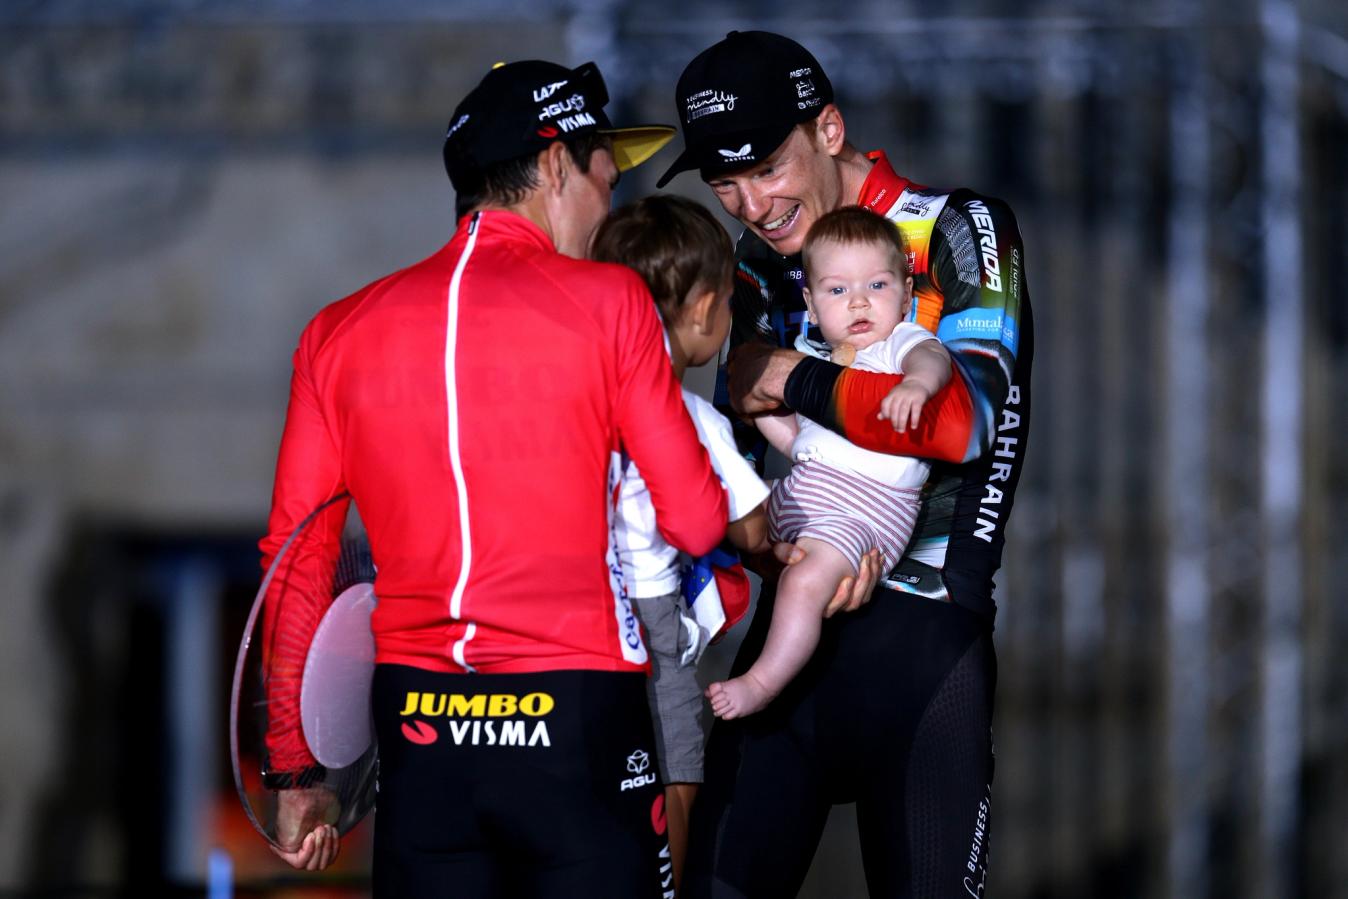 Haig and his son on the Podium of the 2021 Vuelta a España with Primož Roglič and his son